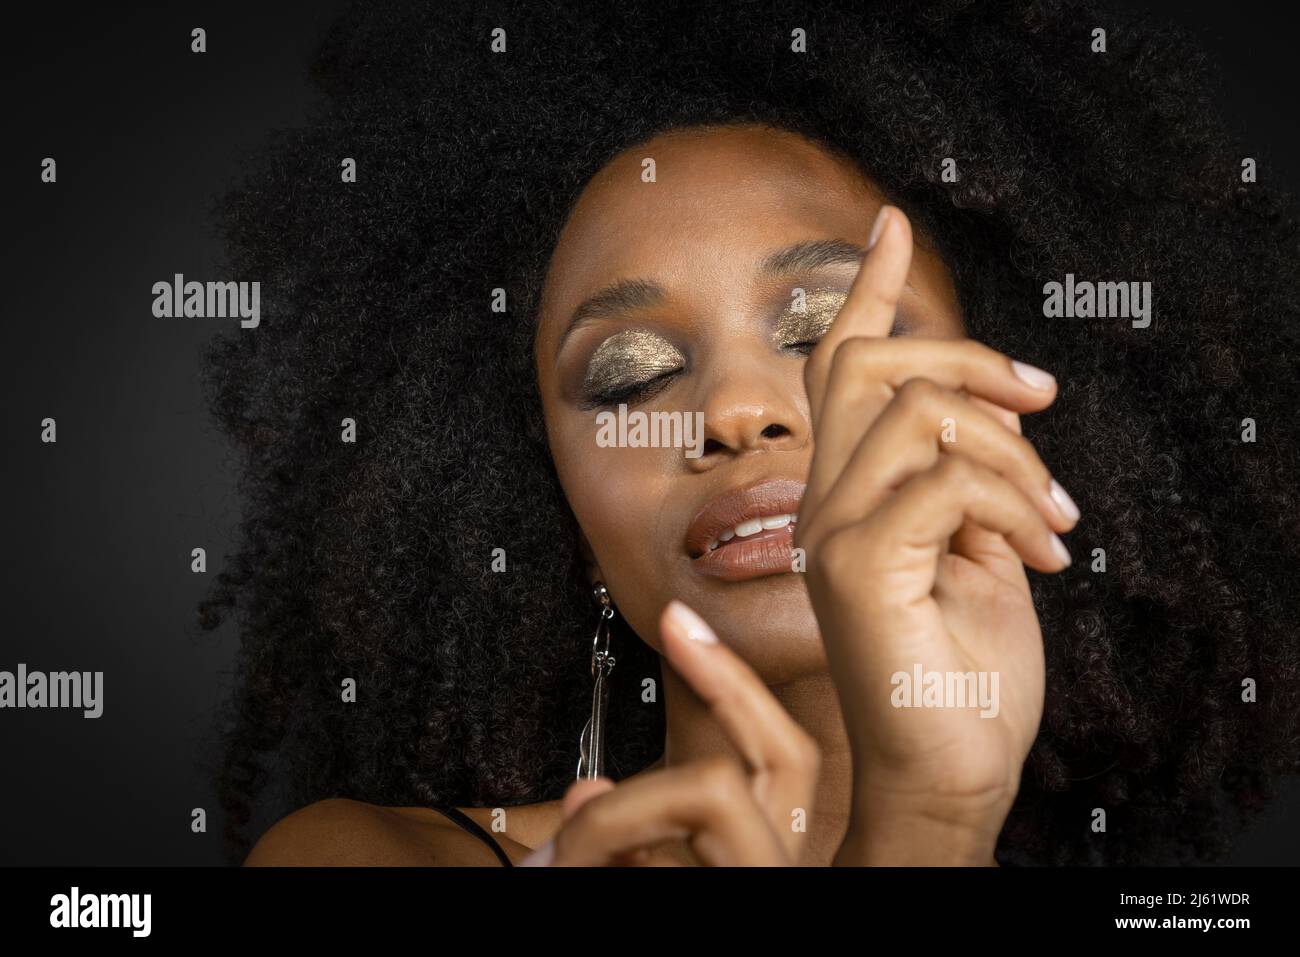 Beautiful young woman with eyes closed against black background Stock Photo